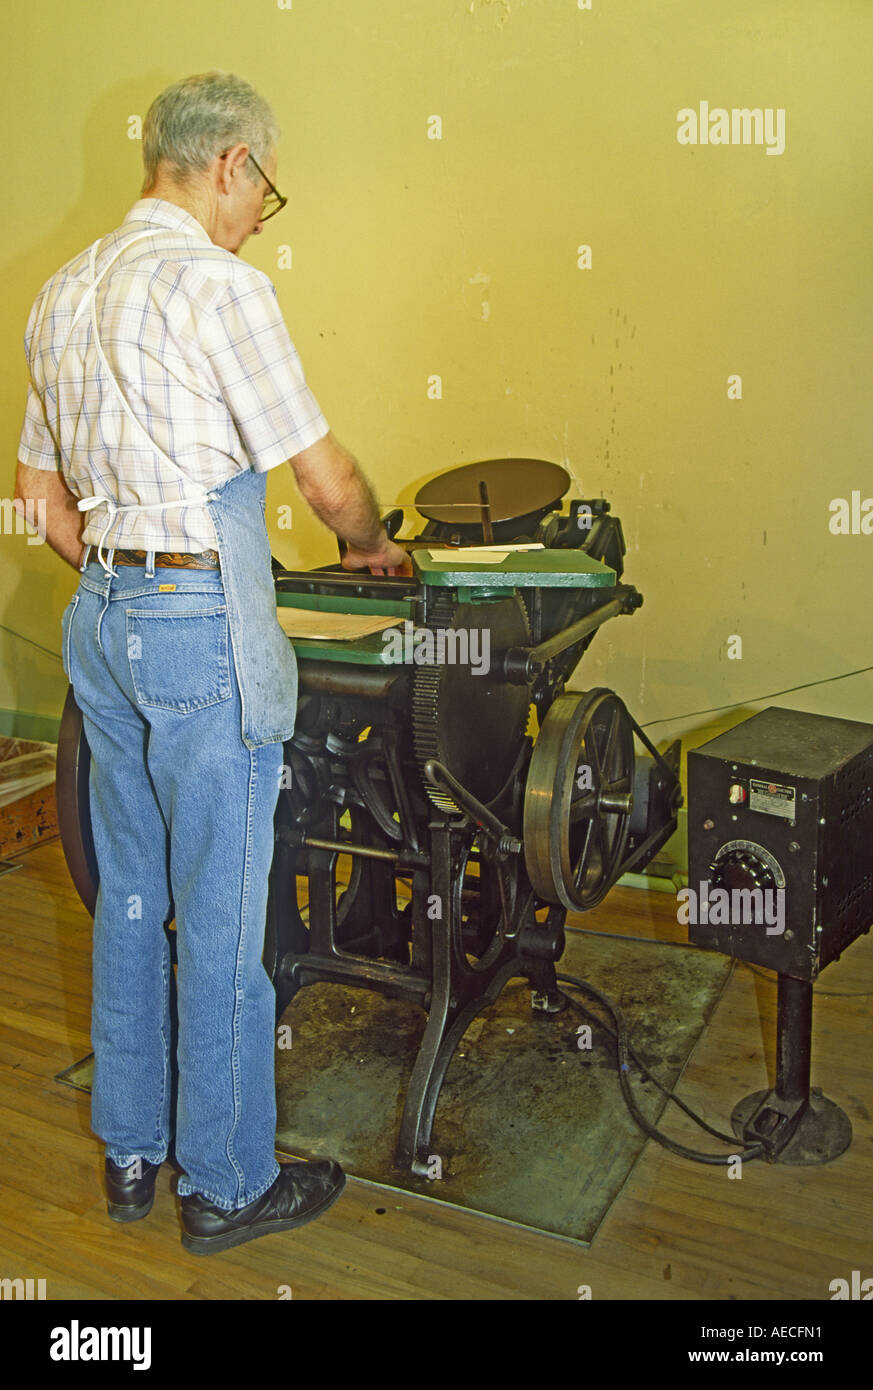 Print shop at Commercial Complex, Old City Park, Dallas, Texas, USA Stock Photo